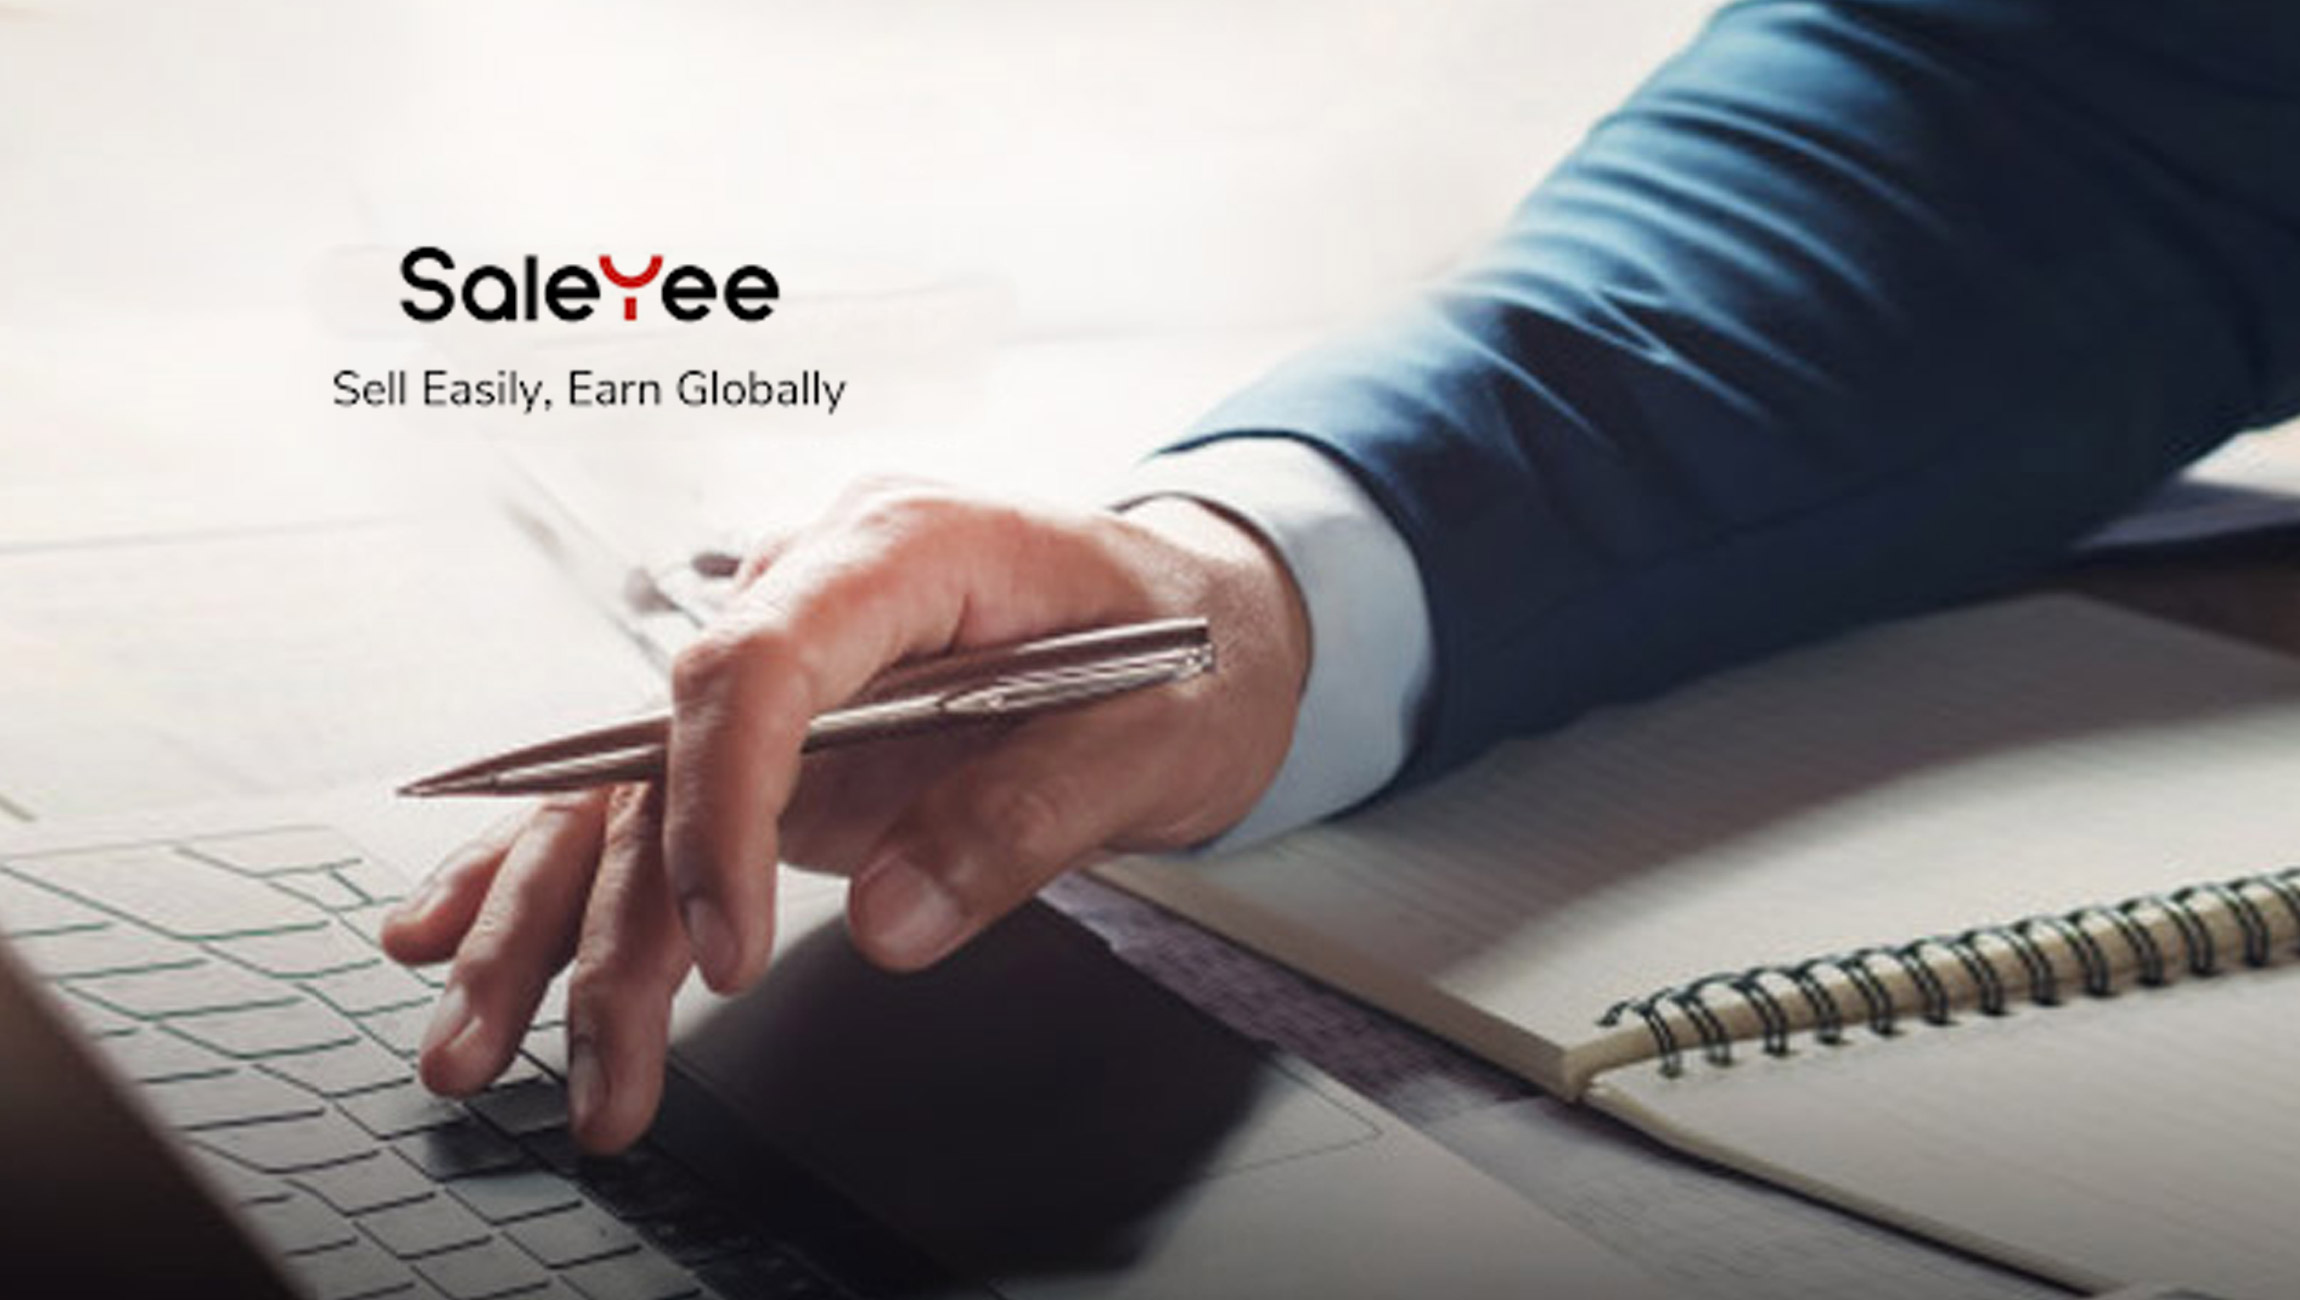 SaleYee Brand Identity is Officially Revealed as A Professional Dropshipping Platform